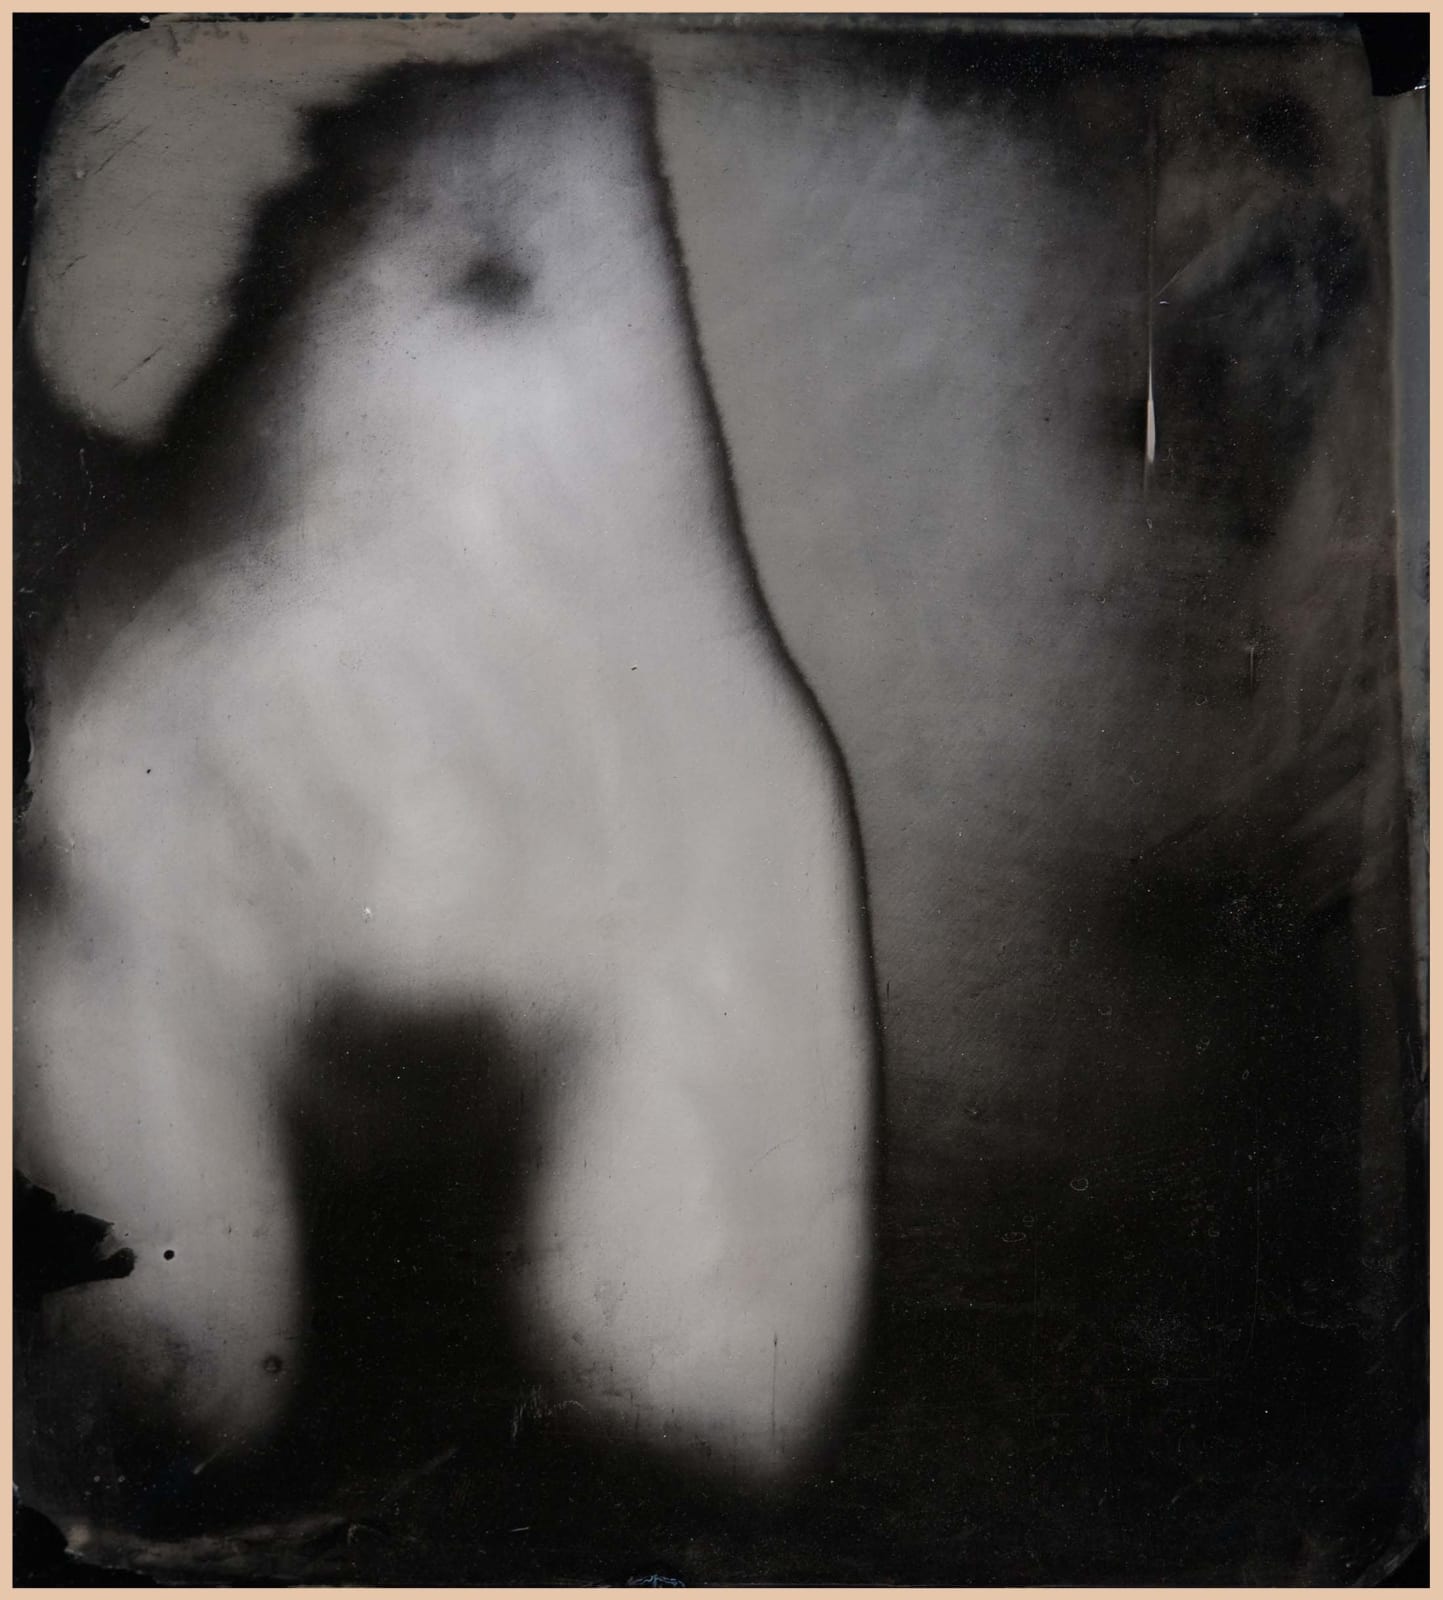 Sally Mann self-portrait of torso from the Upon Reflection series